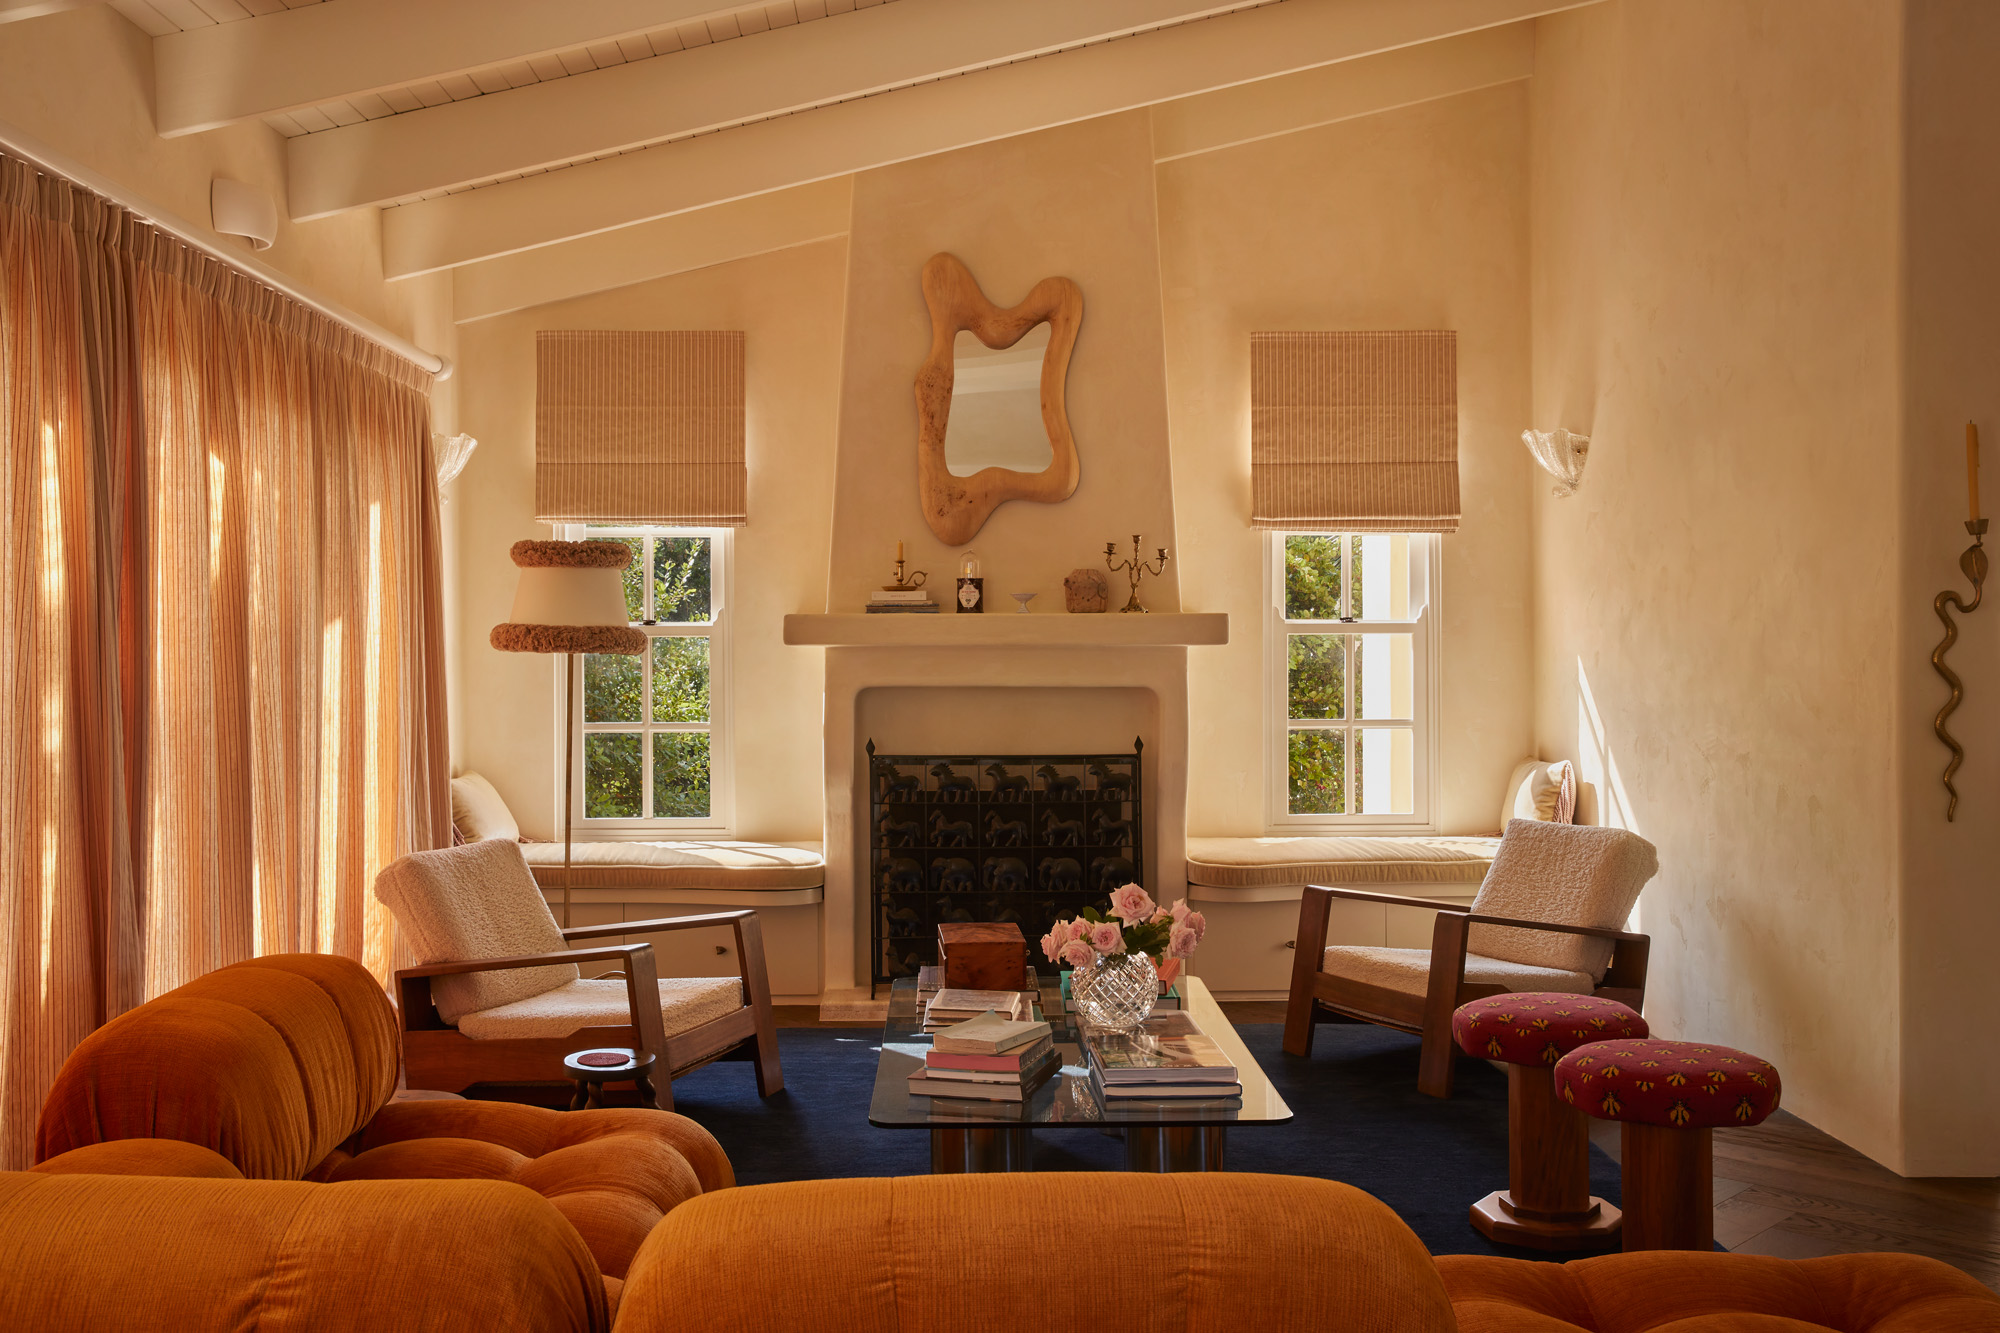 the loung room inside the home of chloe tozer, featuring a blue rug, sand-coloured walls, two arm chairs and an orange sofa set around a glass coffee table and a fireplace